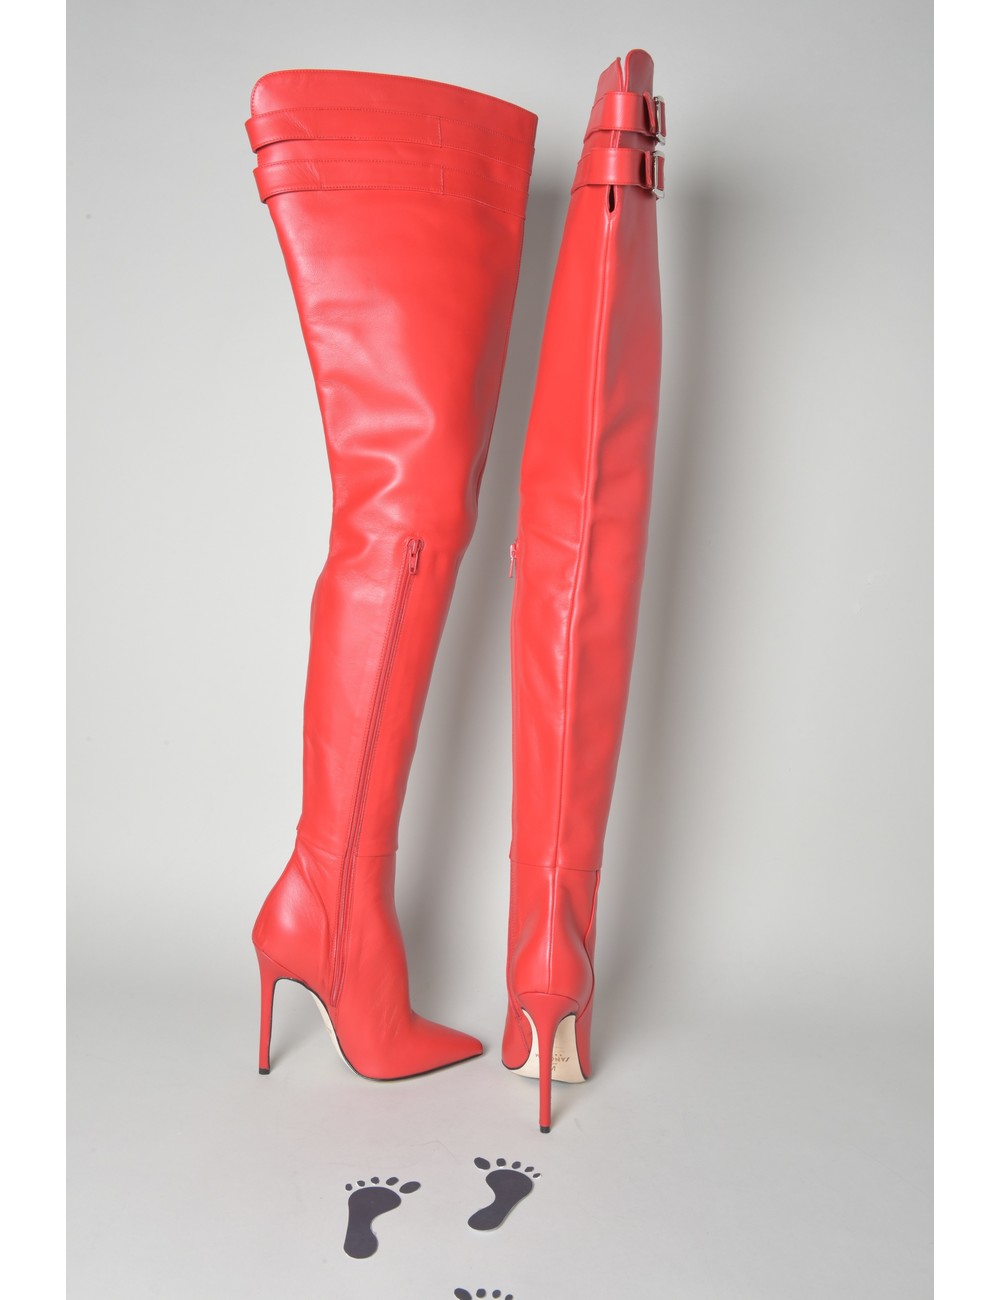 Sanctum Shoes Sanctum sample ANNA red nappa leather thigh boots with straps